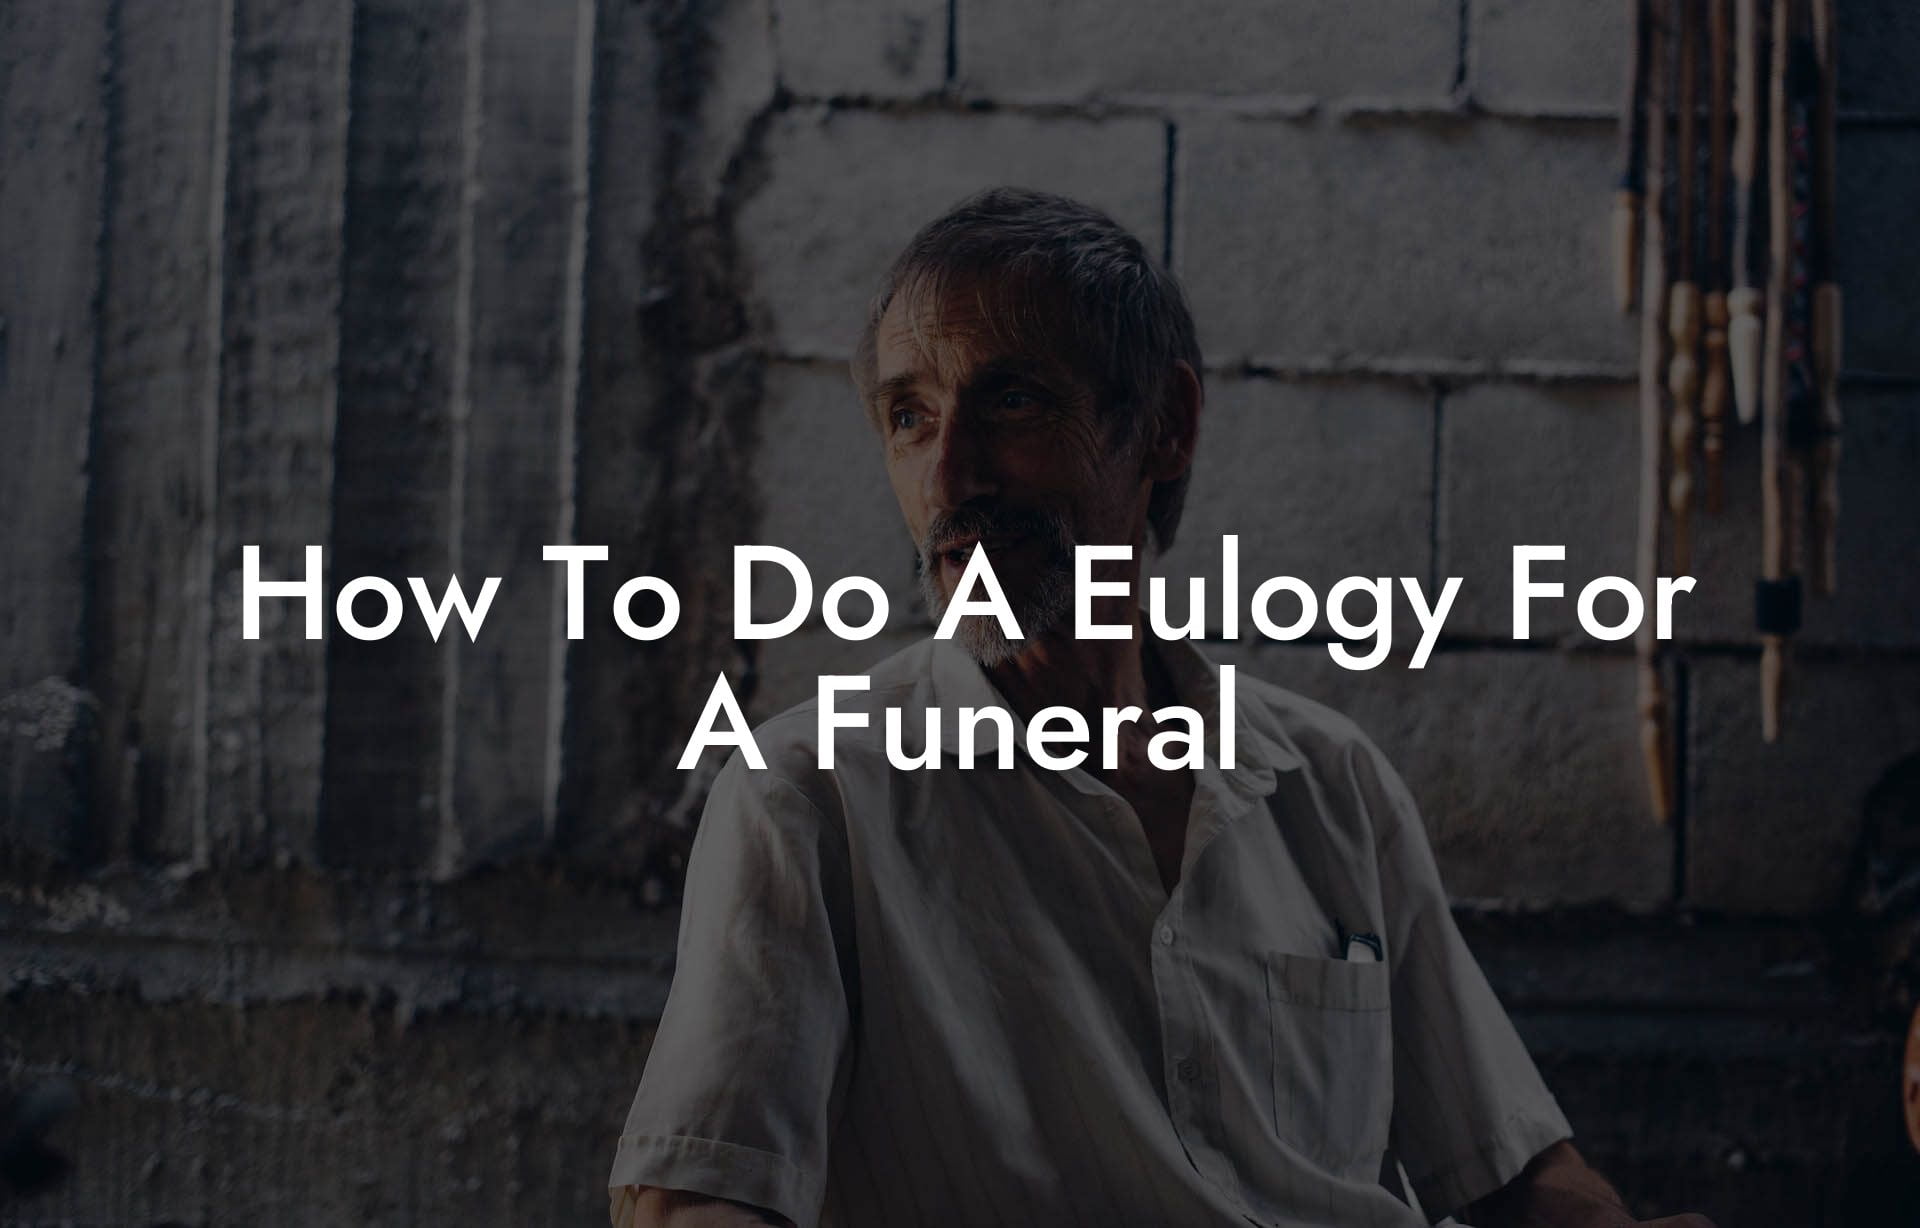 How To Do A Eulogy For A Funeral